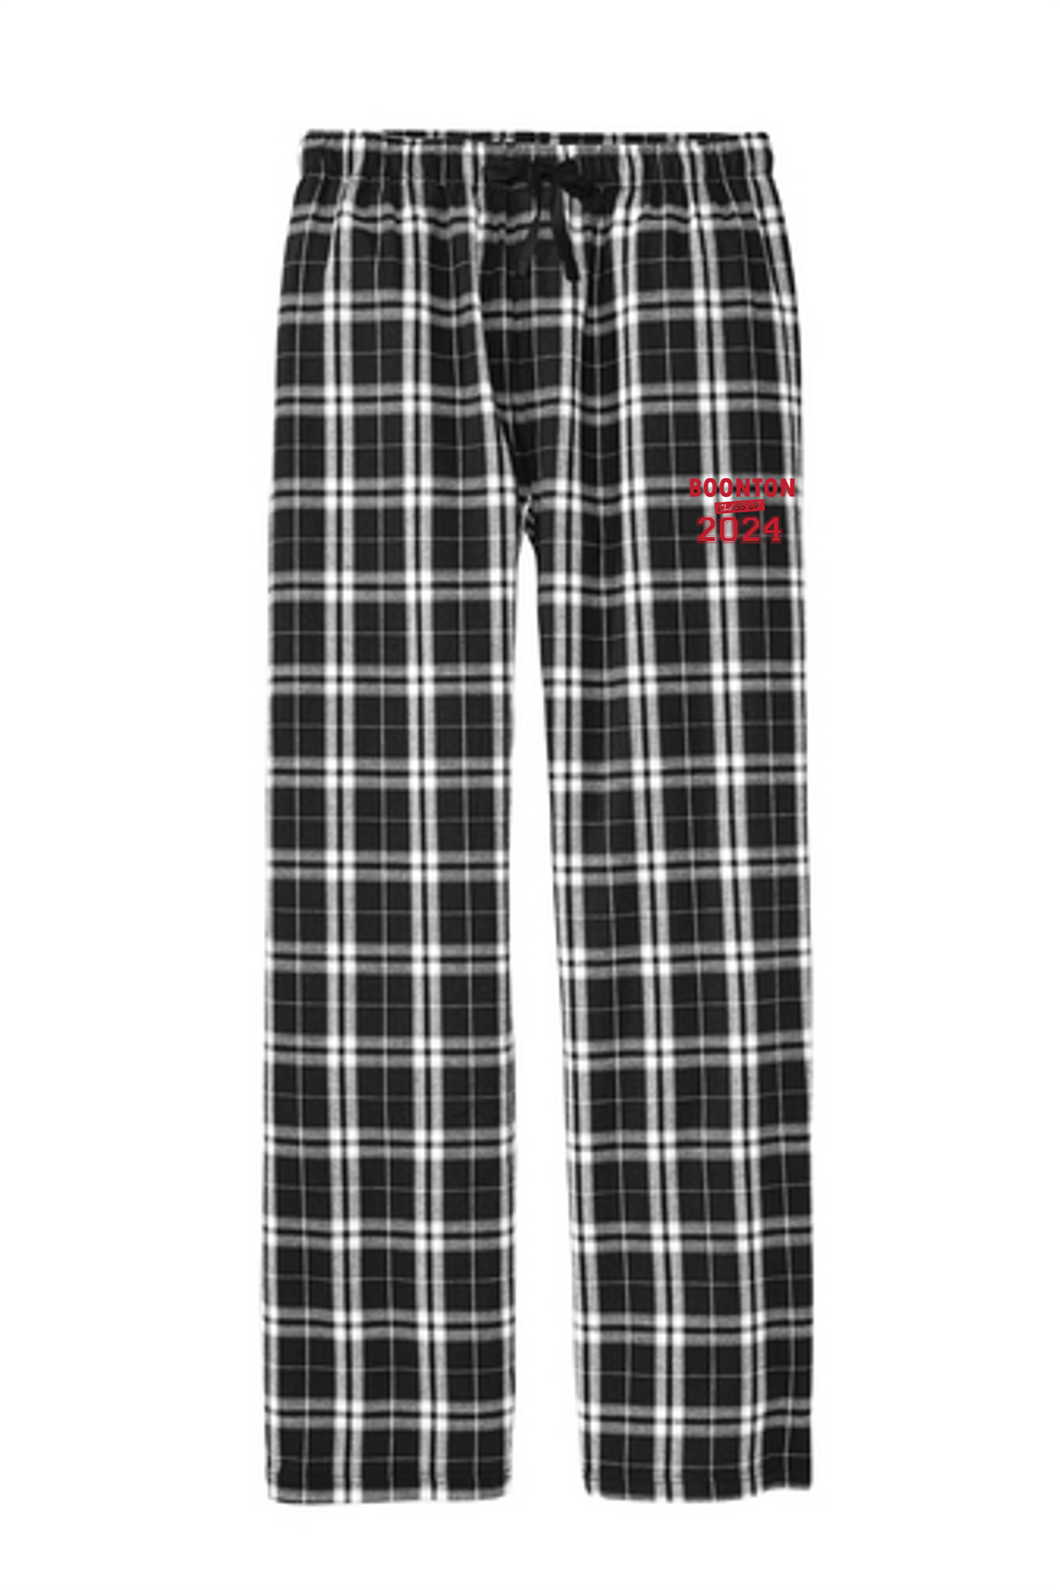 District ® Flannel Plaid Pant - Boonton Class of 2024